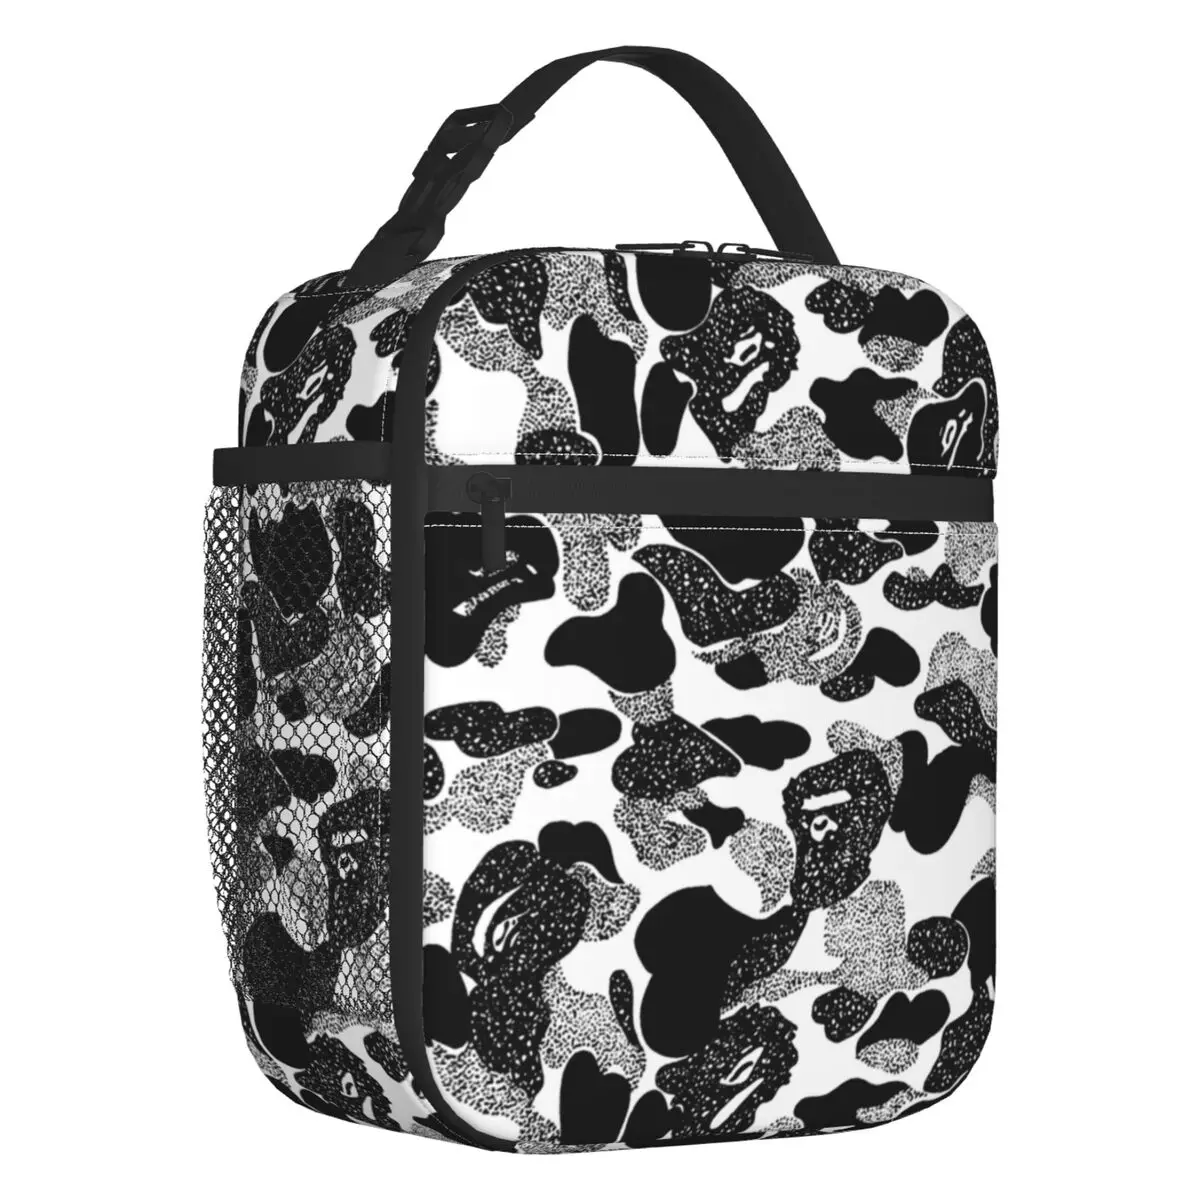 Black And White Camo Insulated Lunch Bags for Women Military Portable Cooler Thermal Food Lunch Box Kids School Children